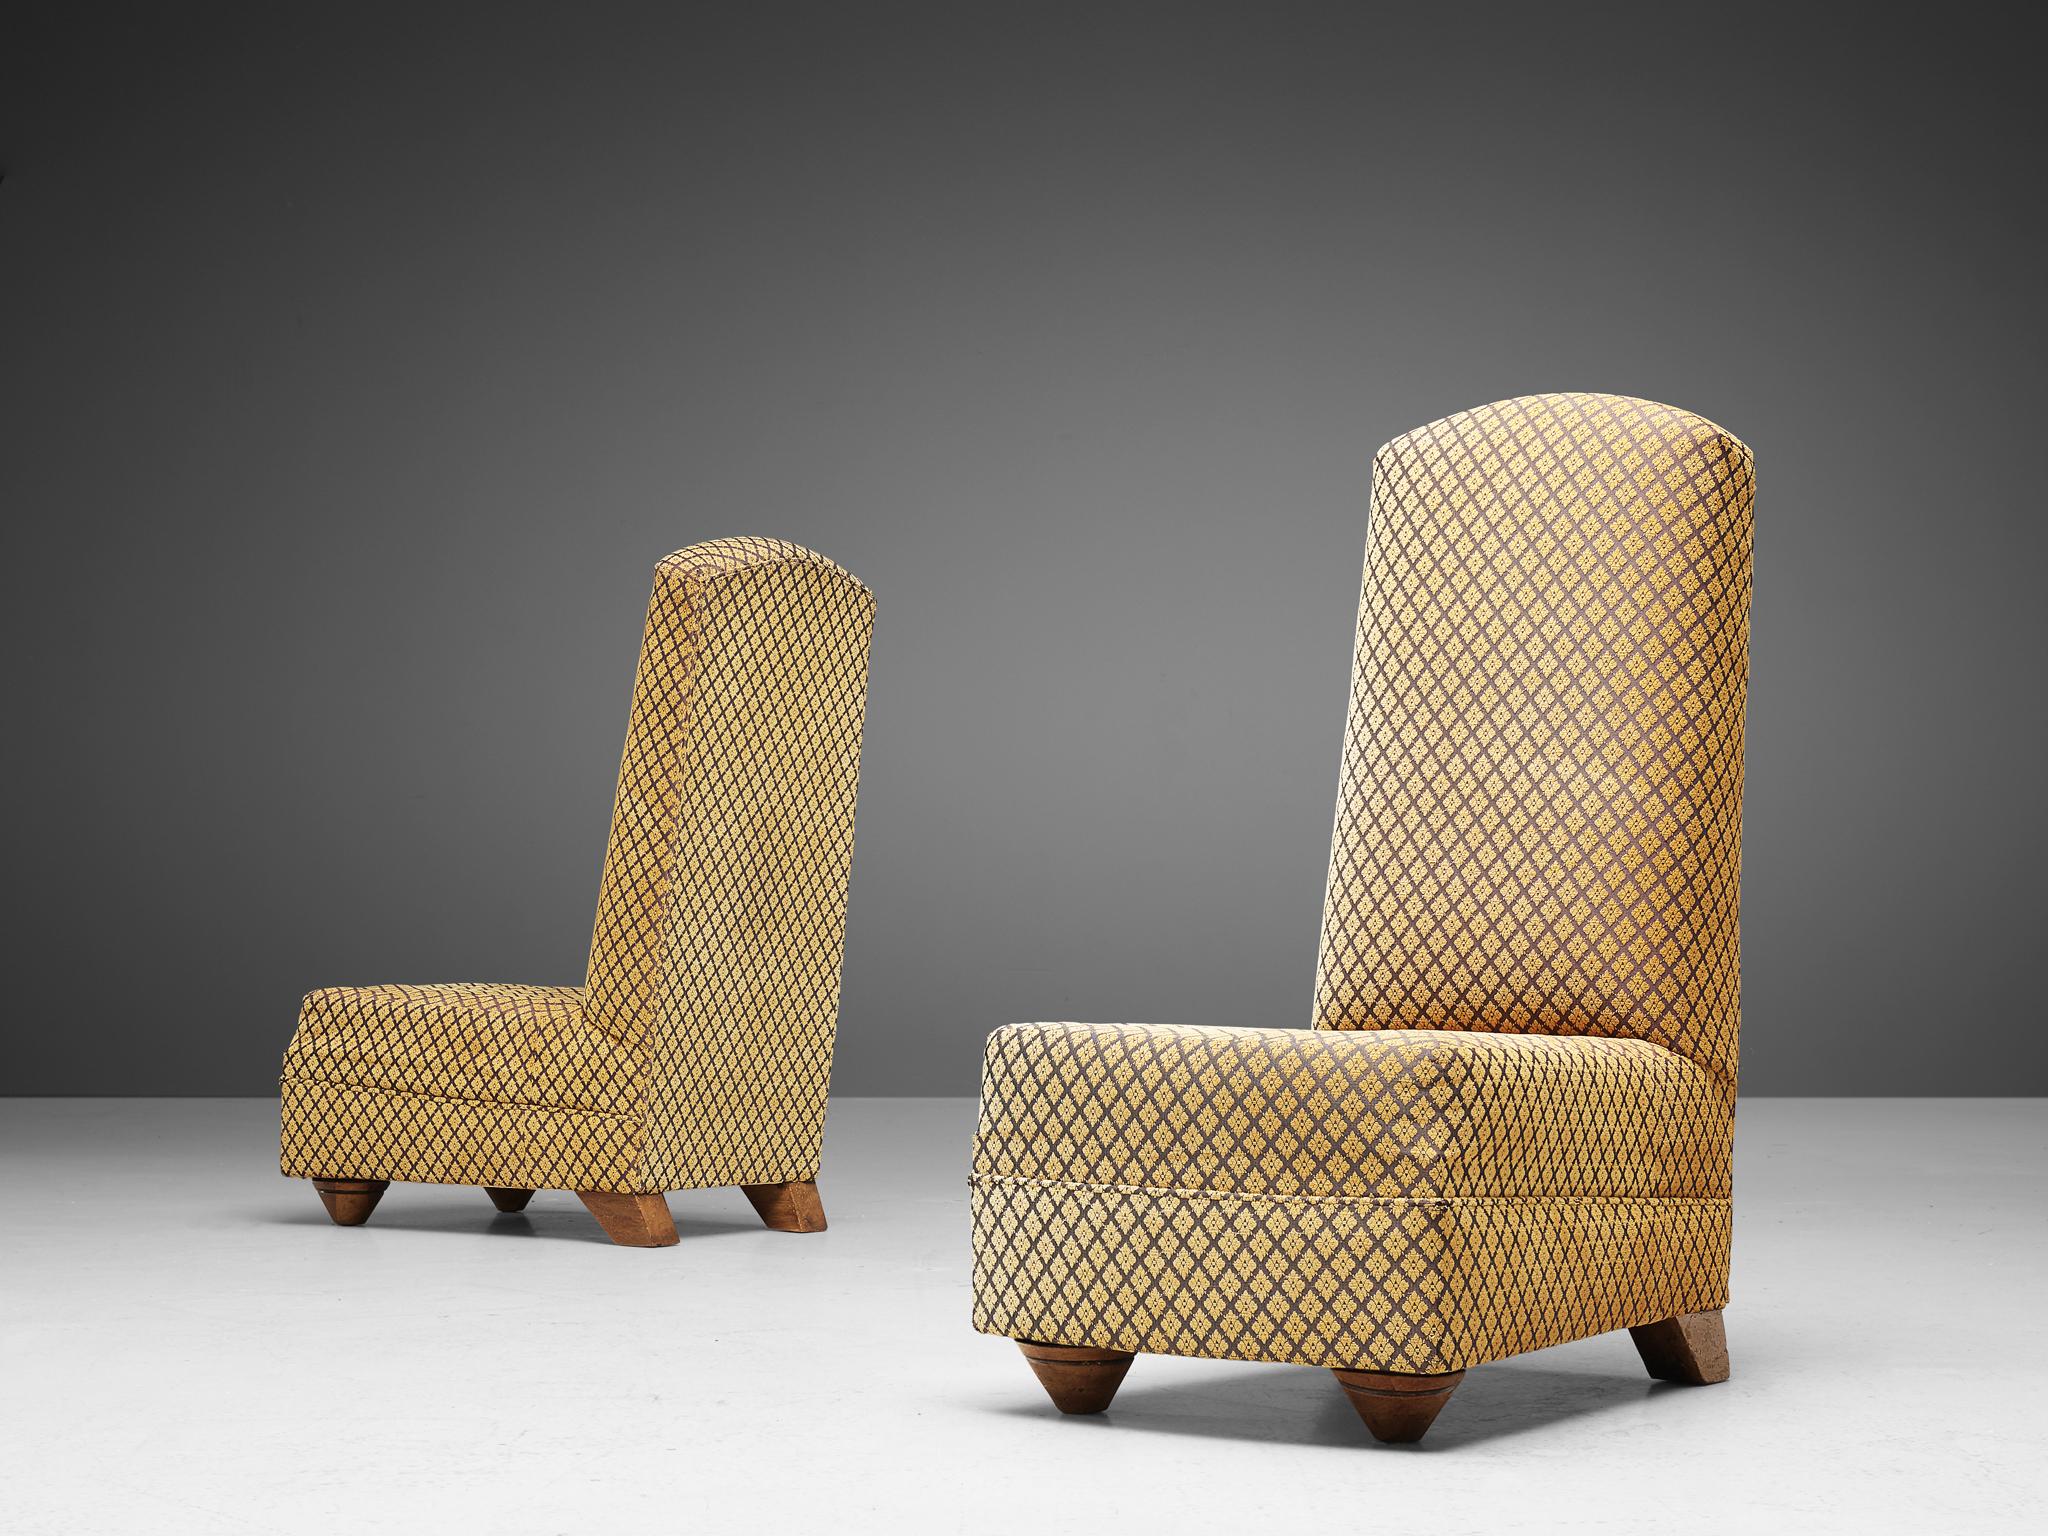 Highback chairs, fabric, wood, Europe, 1930s

Four highback chairs with ocher textured floral upholstery. The seating is lifted by conical wooden legs in the front that have a decorative carving all around, giving these chairs an Art Deco